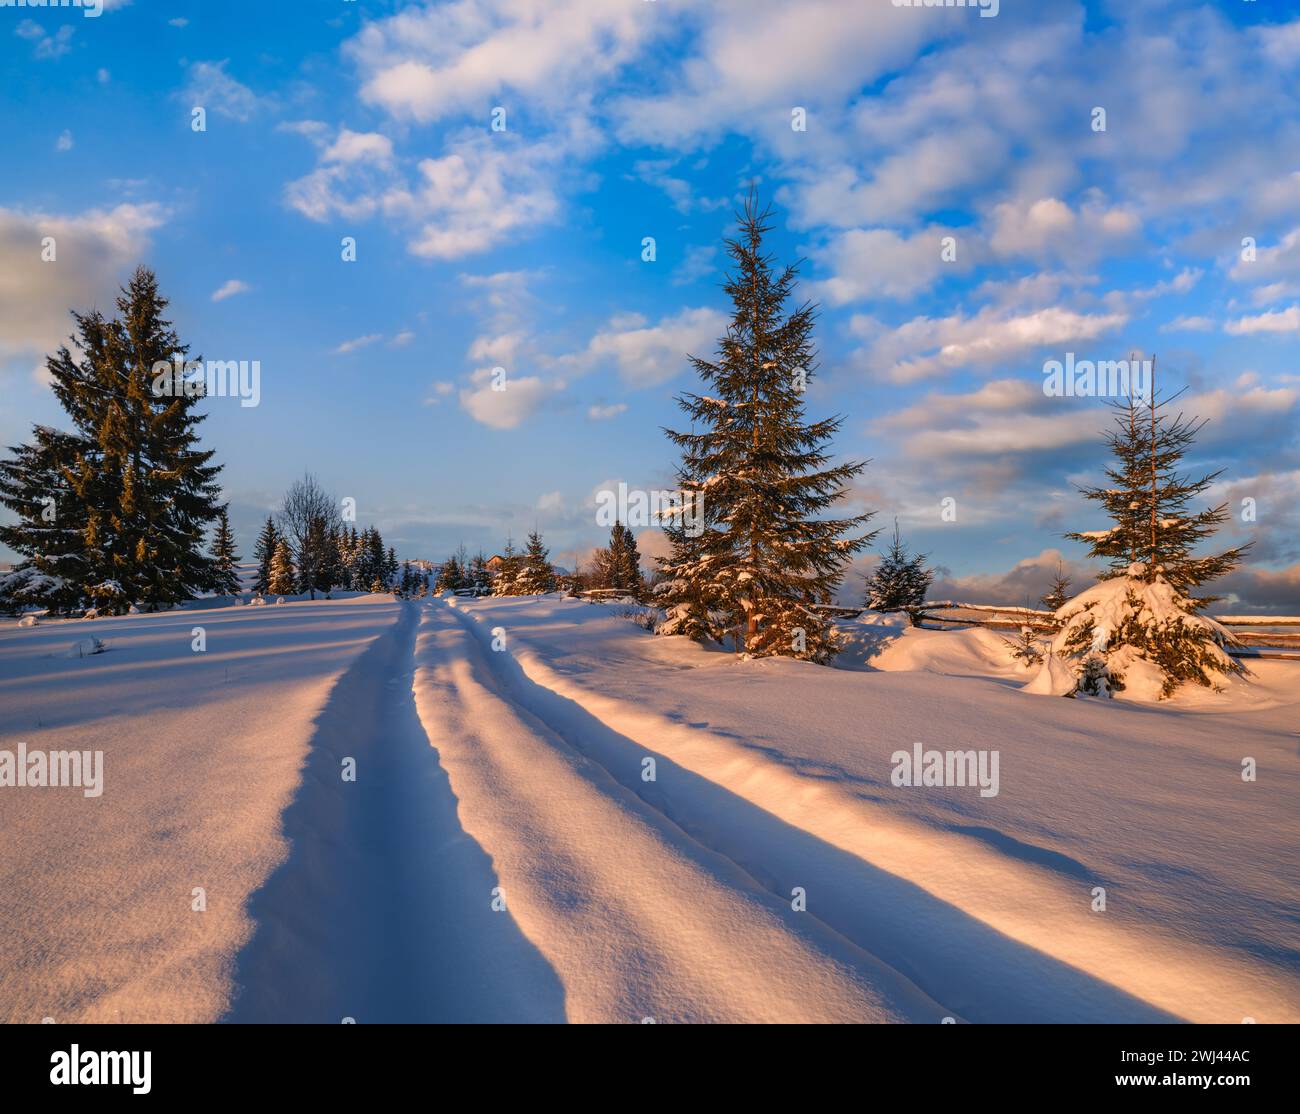 Winter snowy hills, tracks on rural dirt road and trees in last evening sunset sun light. Small and quiet alpine village outskir Stock Photo